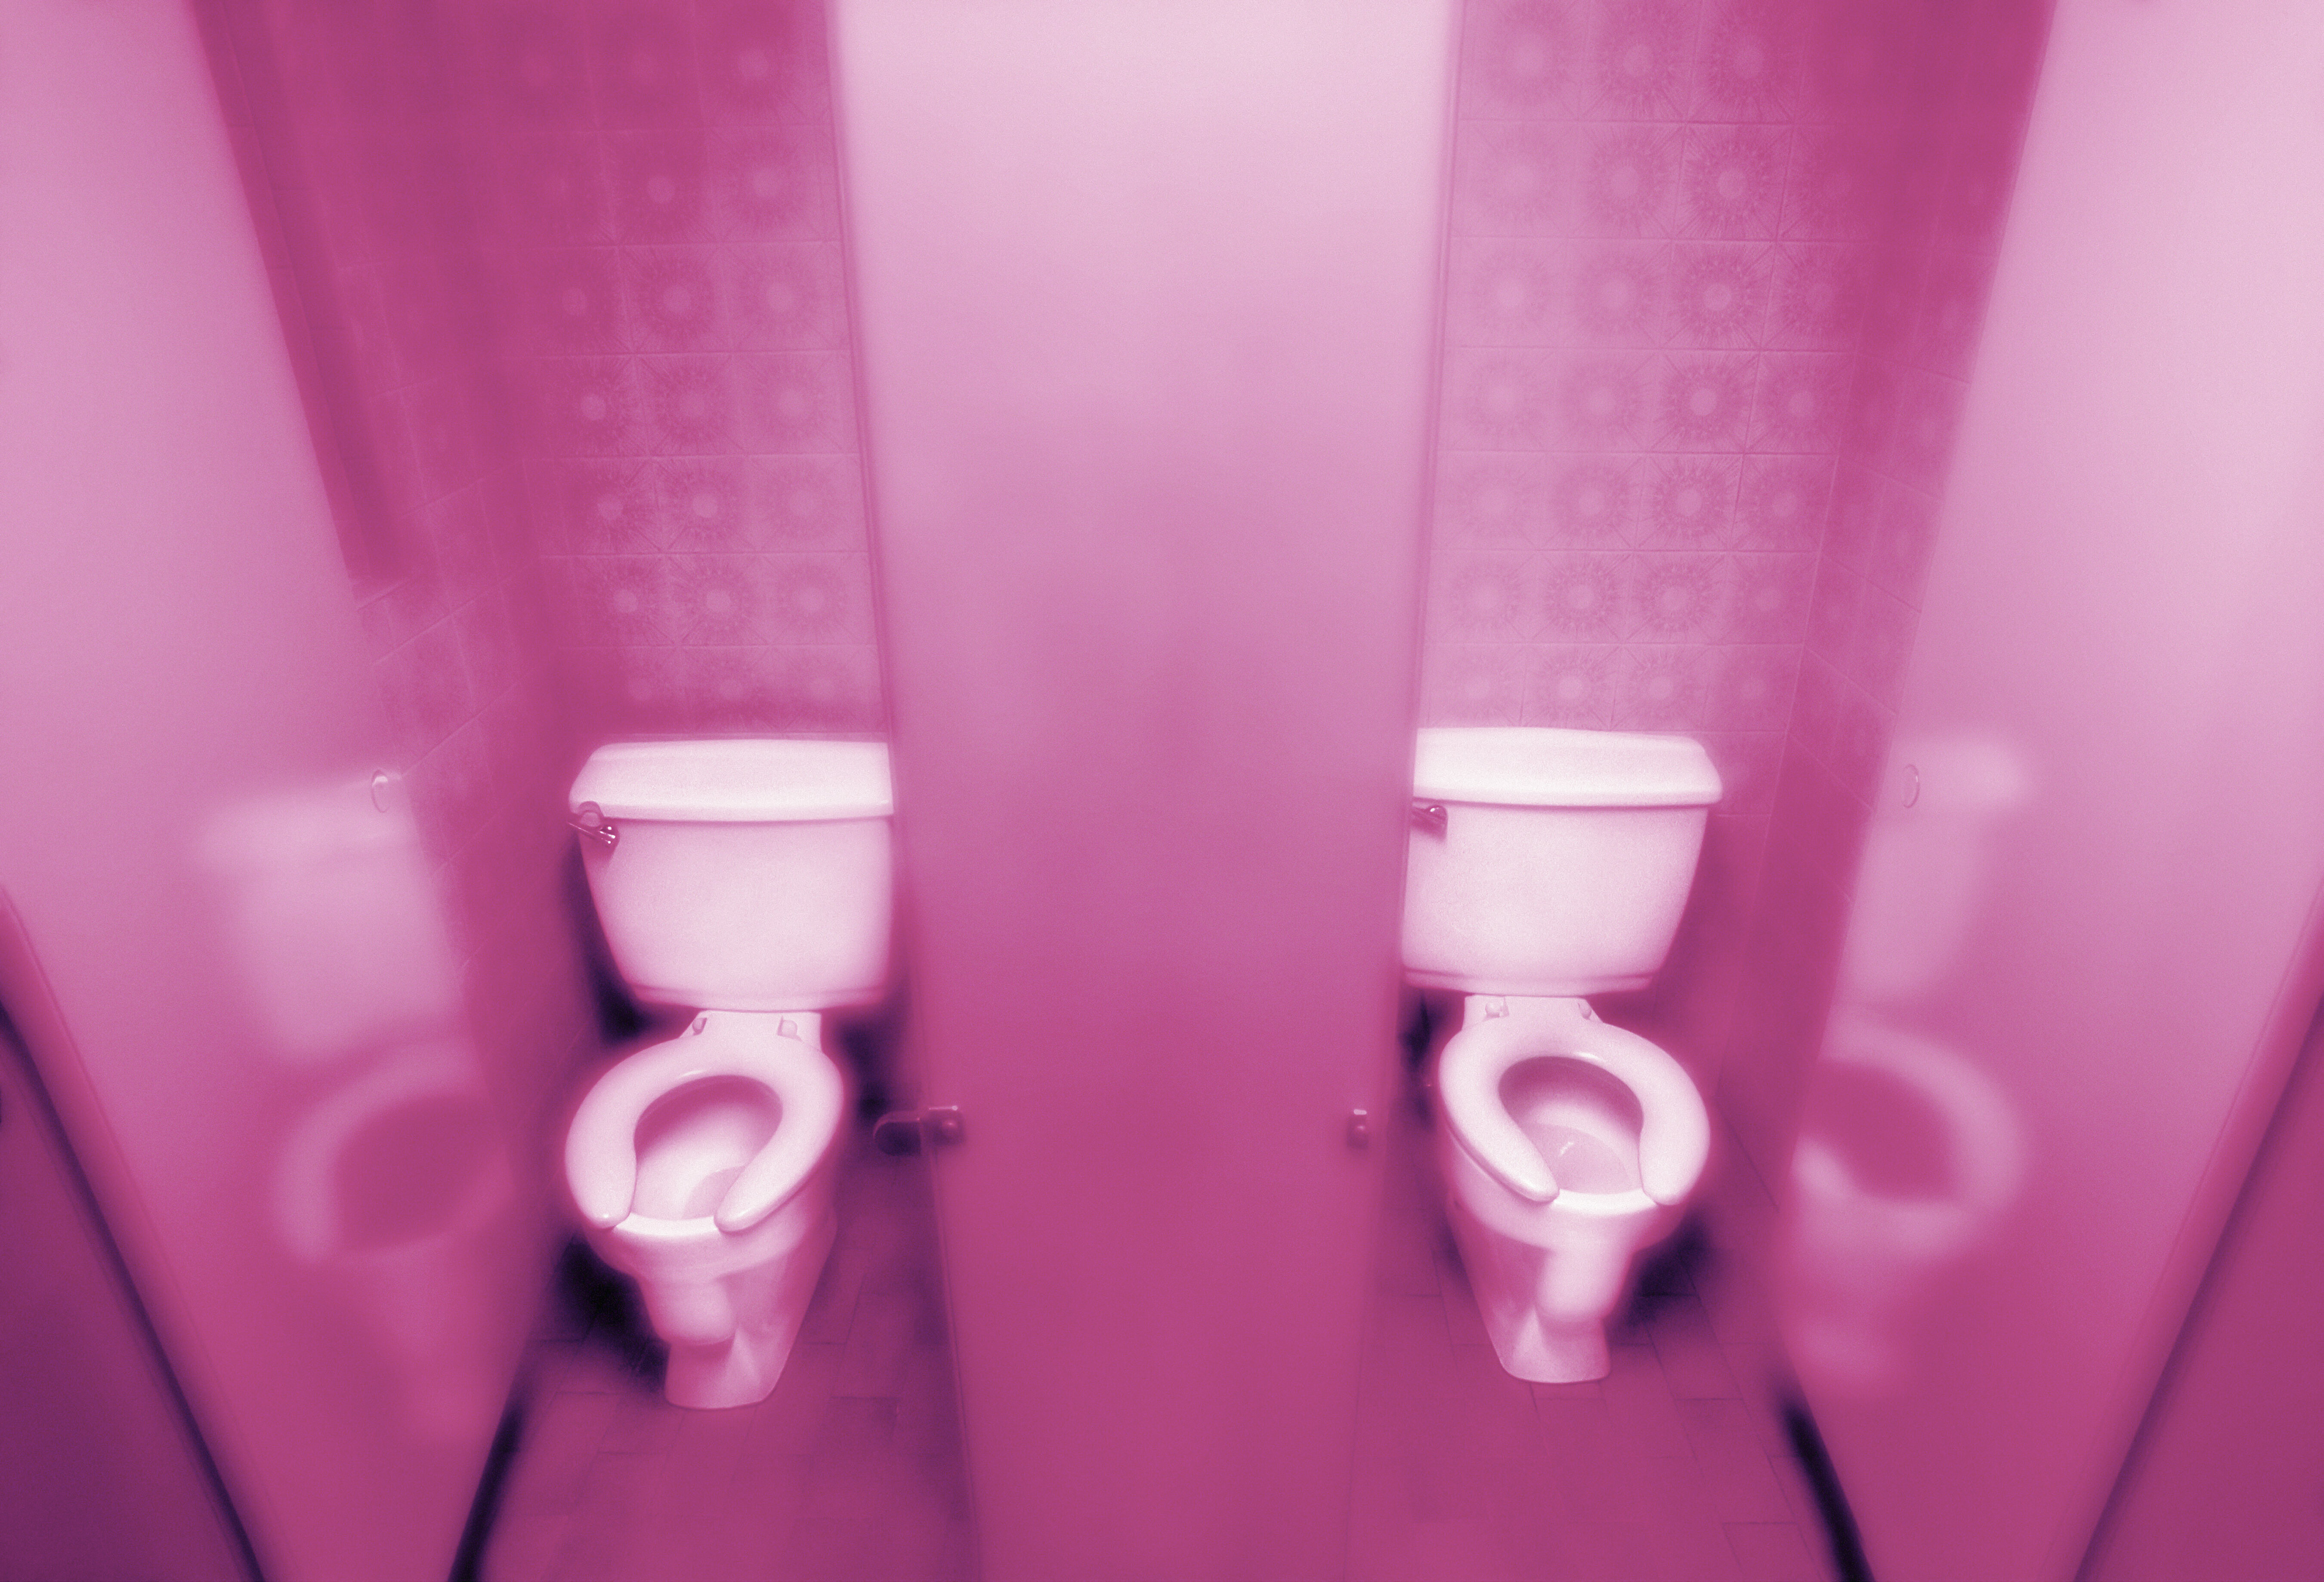 Two side-by-side toilets in a restroom; privacy might be a concern